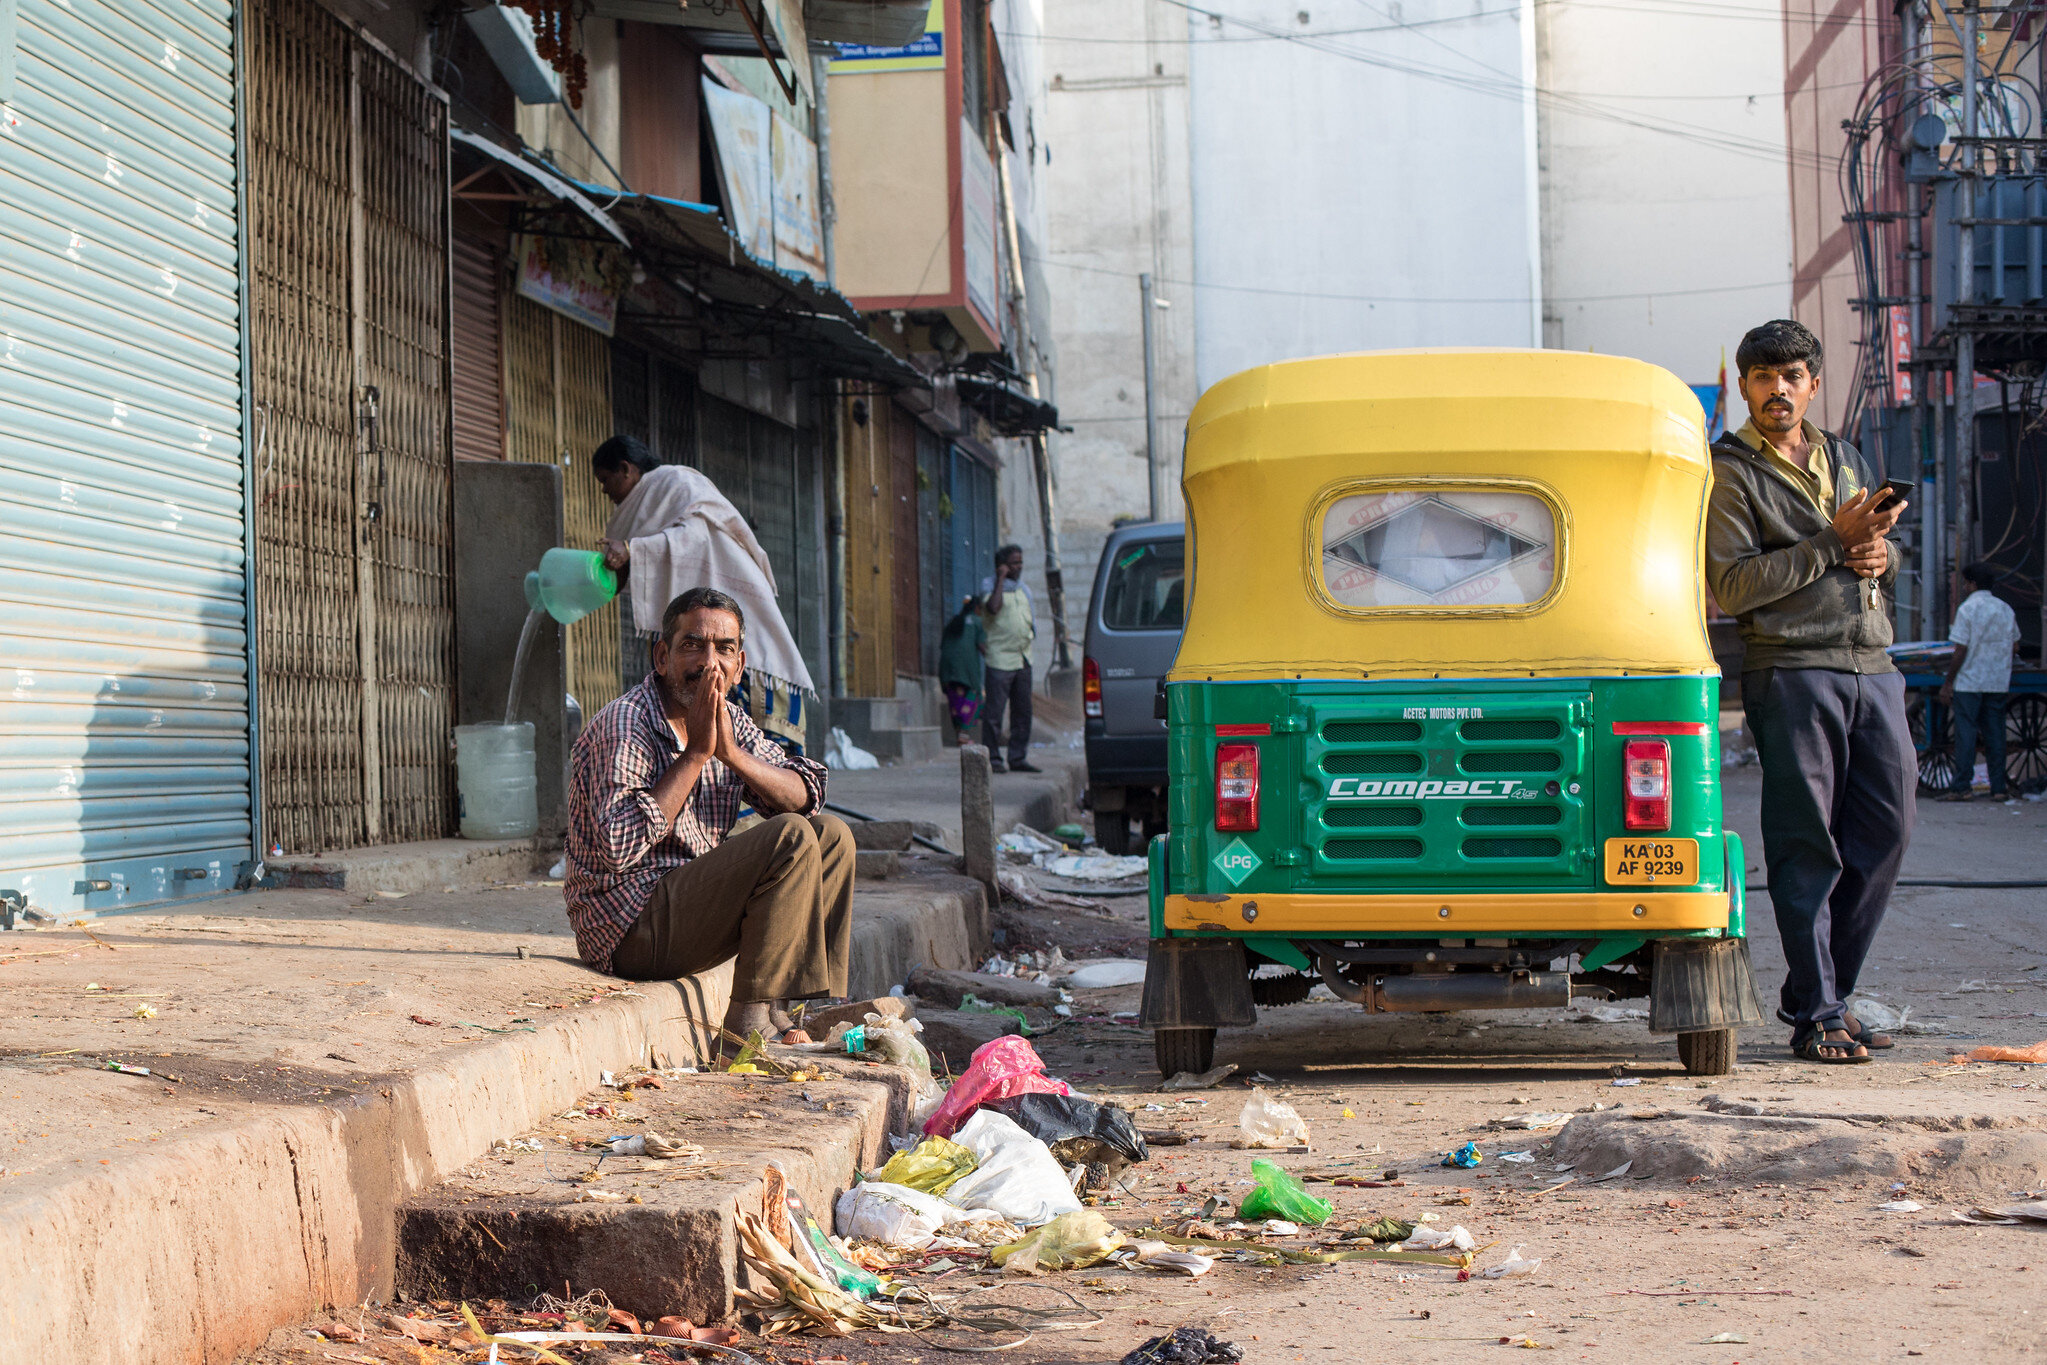 The streets full of life (and rubbish) on a Sunday morning in central Bengaluru.